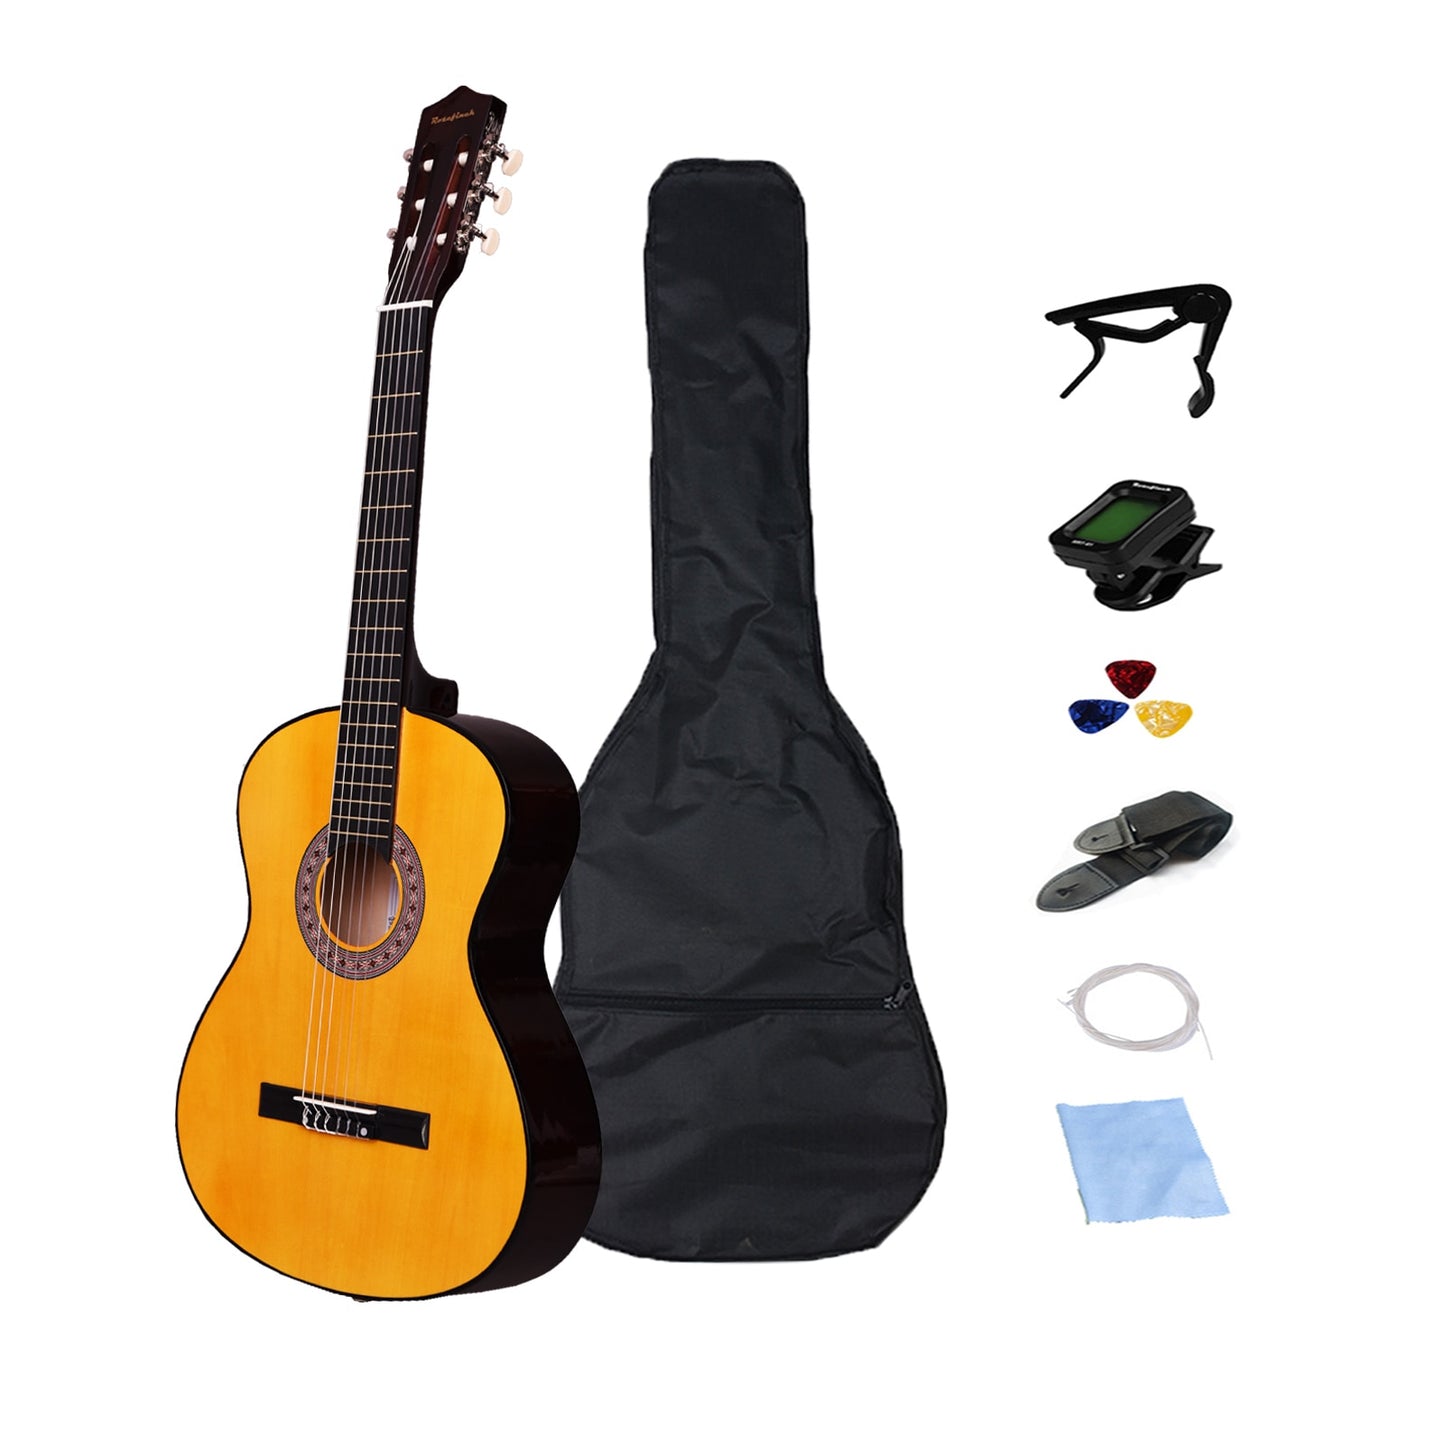 Rosefinch 30/39 Inch Classical Guitar Child Guitarra Fast delivery Free Accessories with Capo Strings Picks Tuner Nylon String